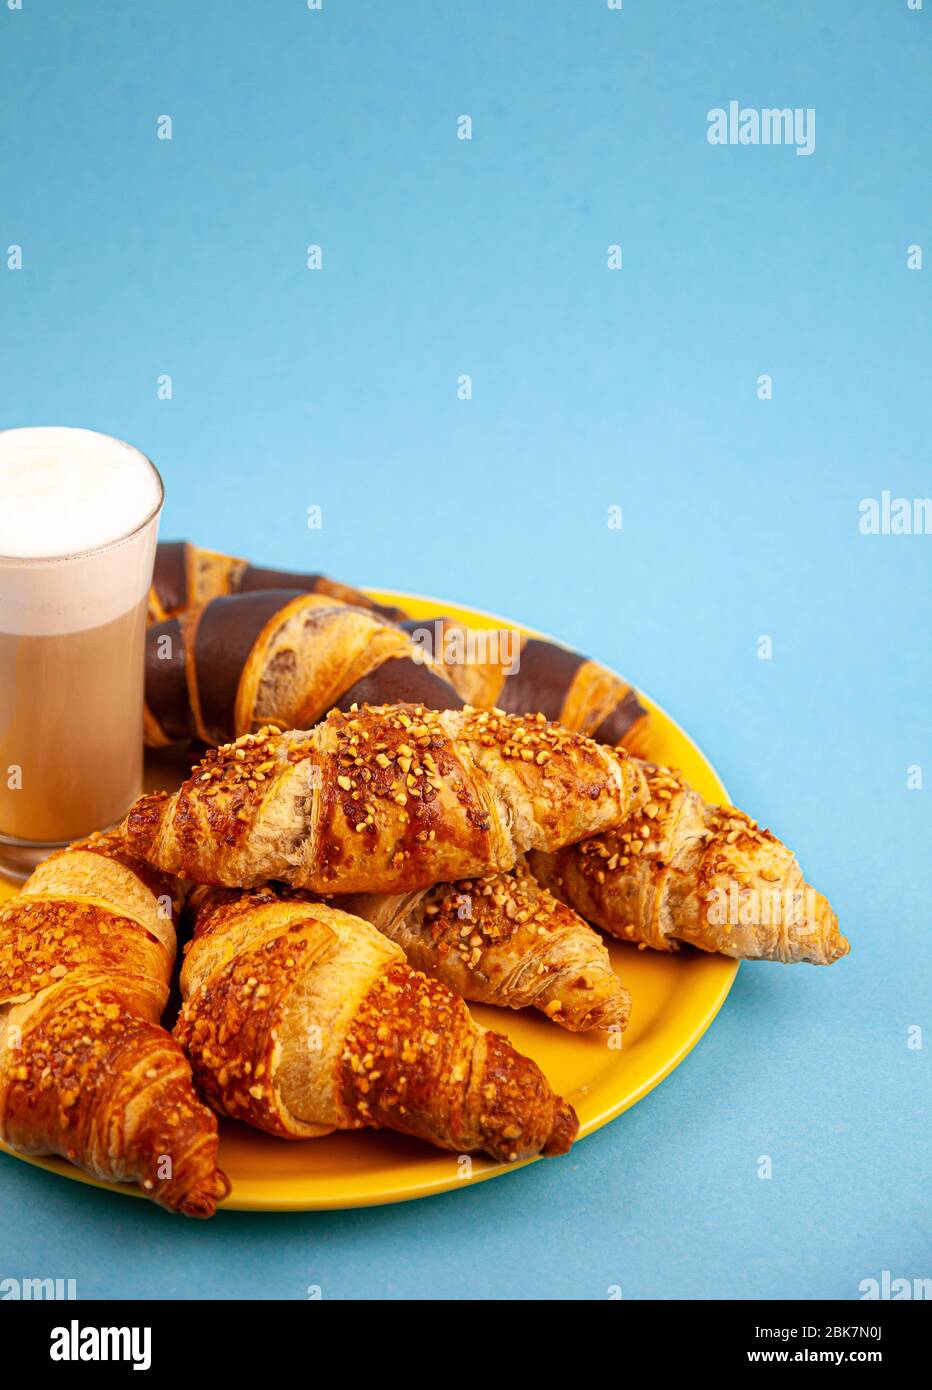 Croissants on a yellow calfskin. Blue background with place for text. A tall glass with a hot morning drink - Latte coffee with milk. Appetizing Stock Photo